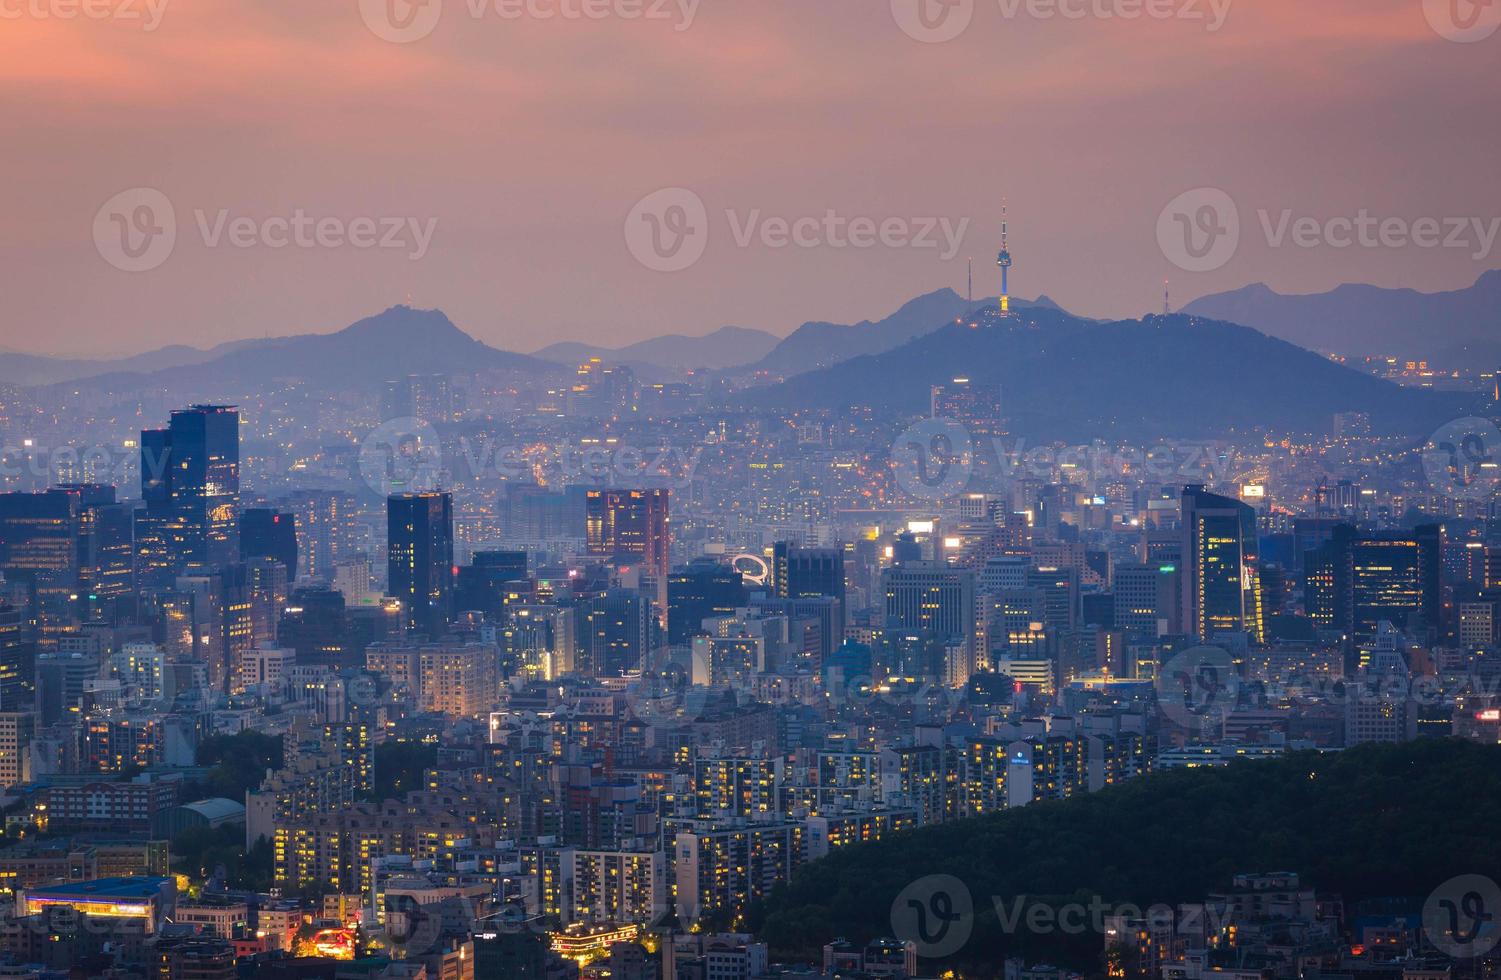 Seoul city and n Seoul tower in Misty day photo